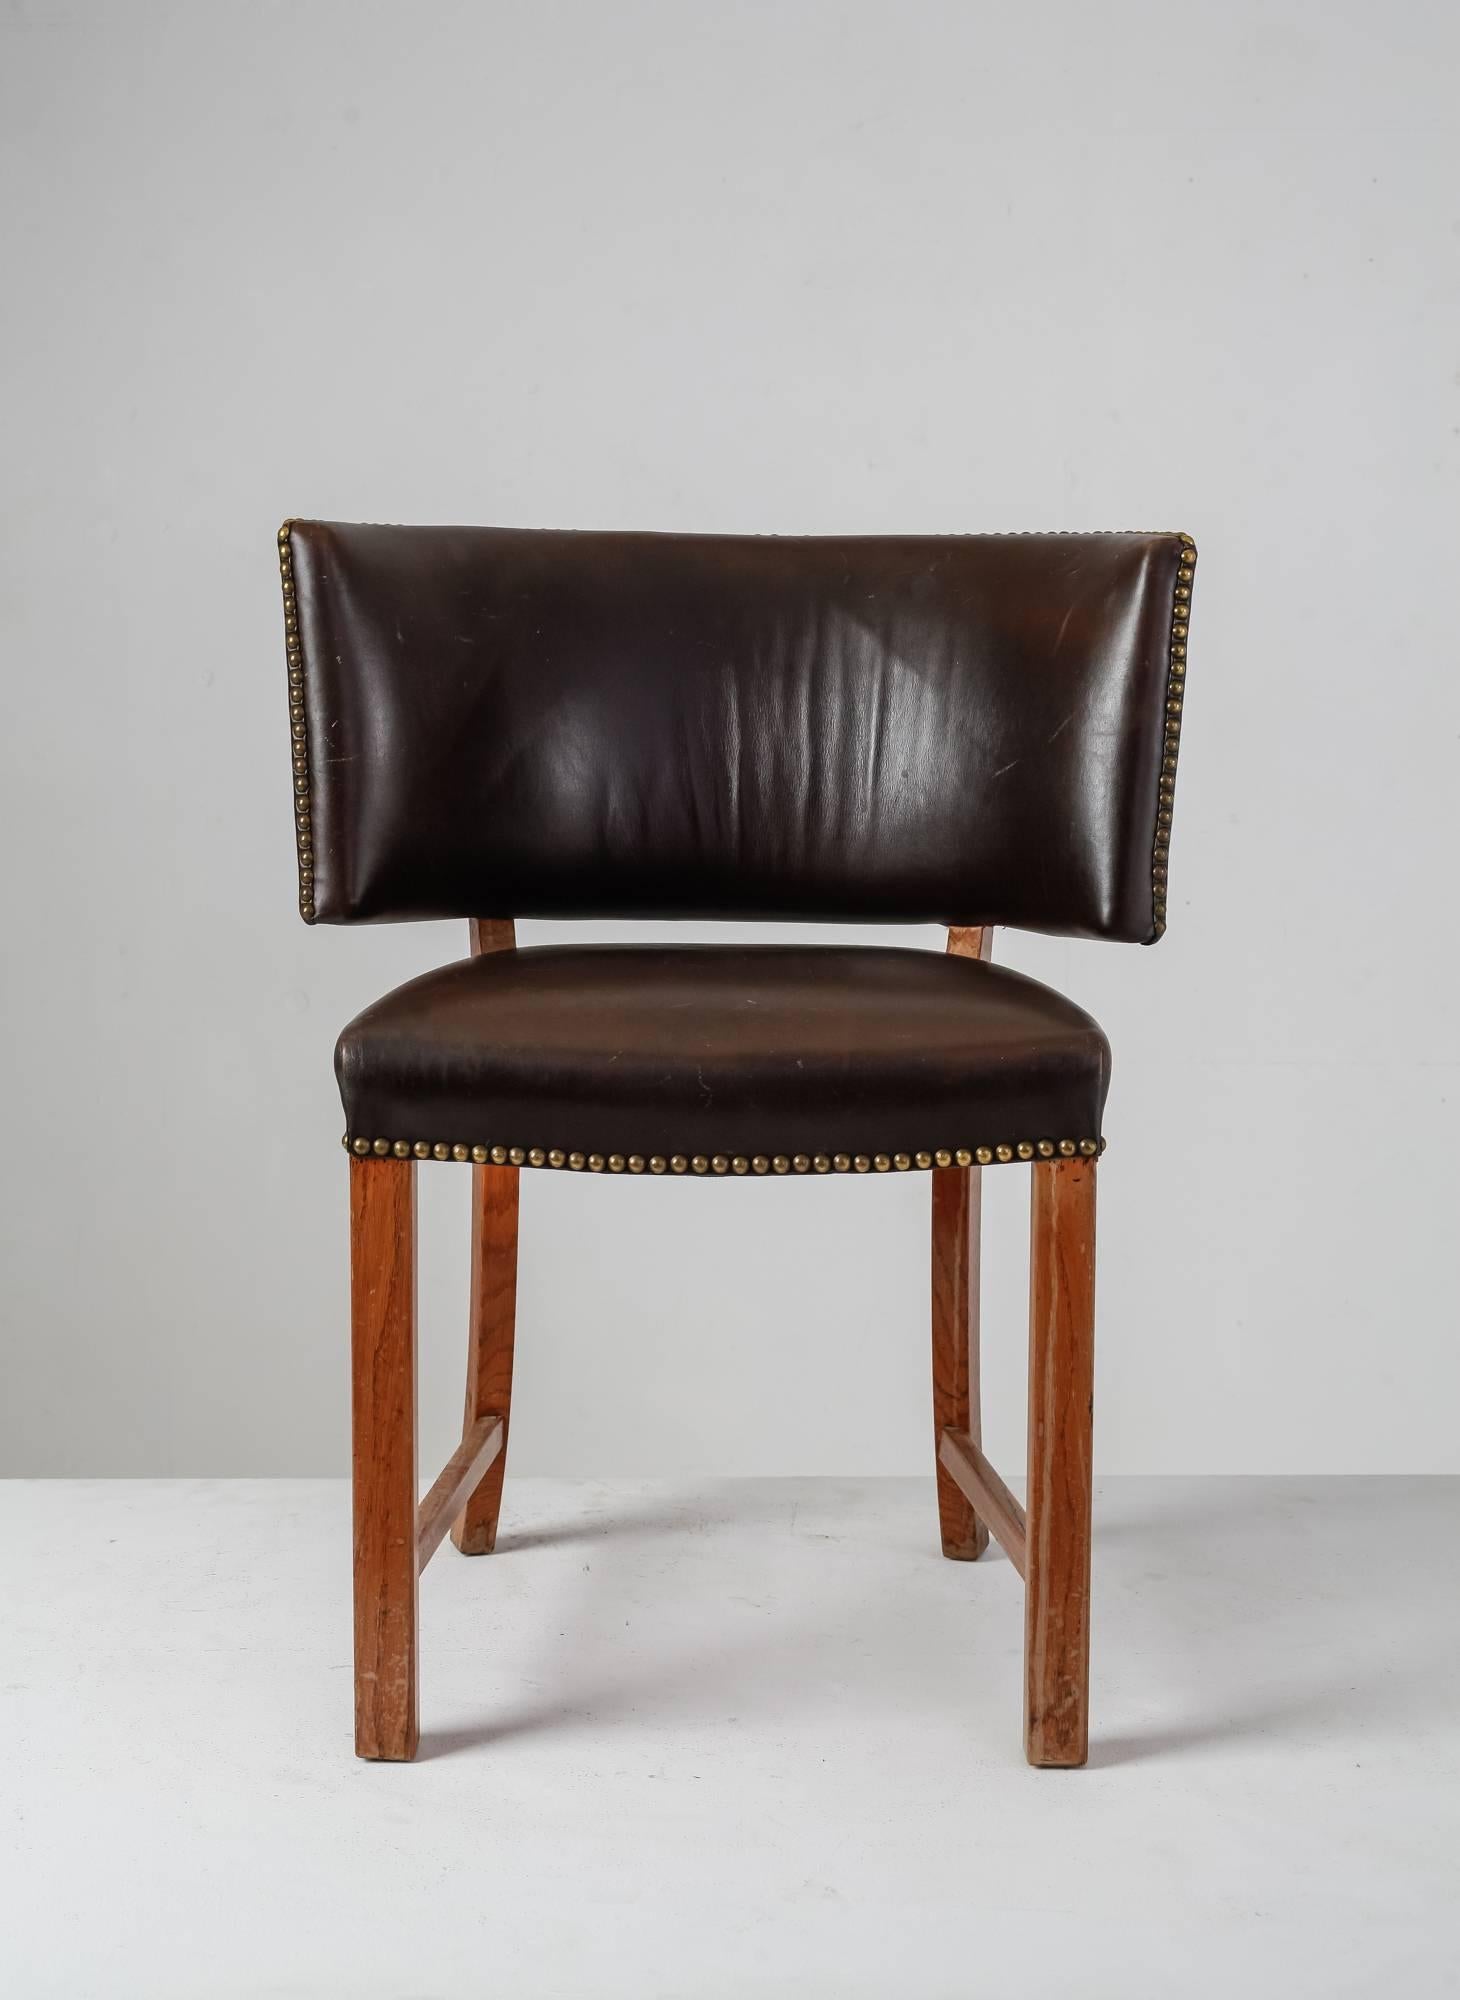 A 1930s Danish sidechair with a large, curved backrest. The chair stands on oak legs and is upholstered with studded dark brown leather.The wide backrest and slightly curved back legs are inspired by the Classic Klismos chairs.A remarkable chair in